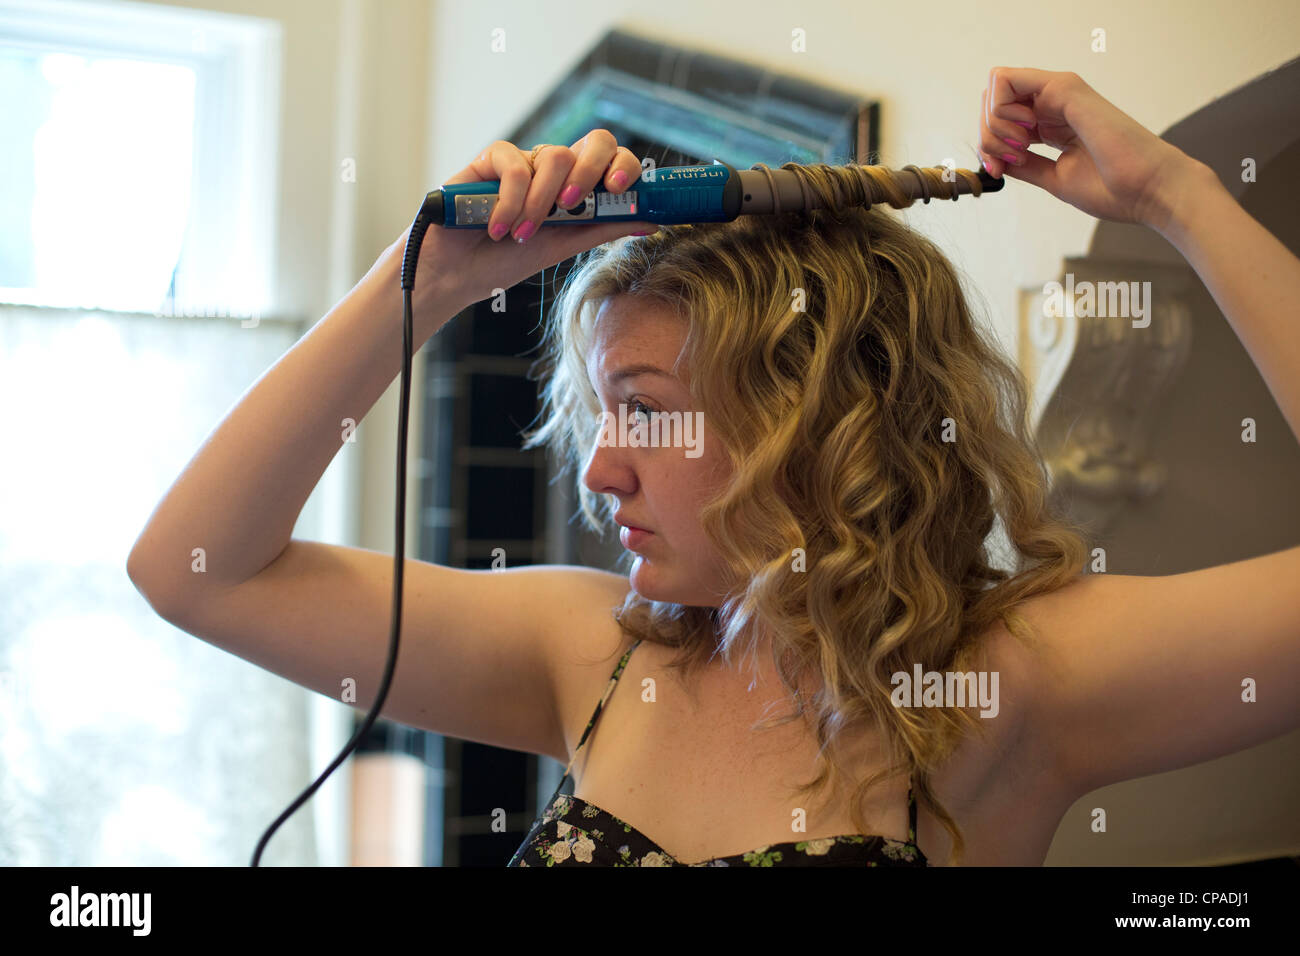 Mariel West, 24, uses a curling iron to curl her hair. Stock Photo